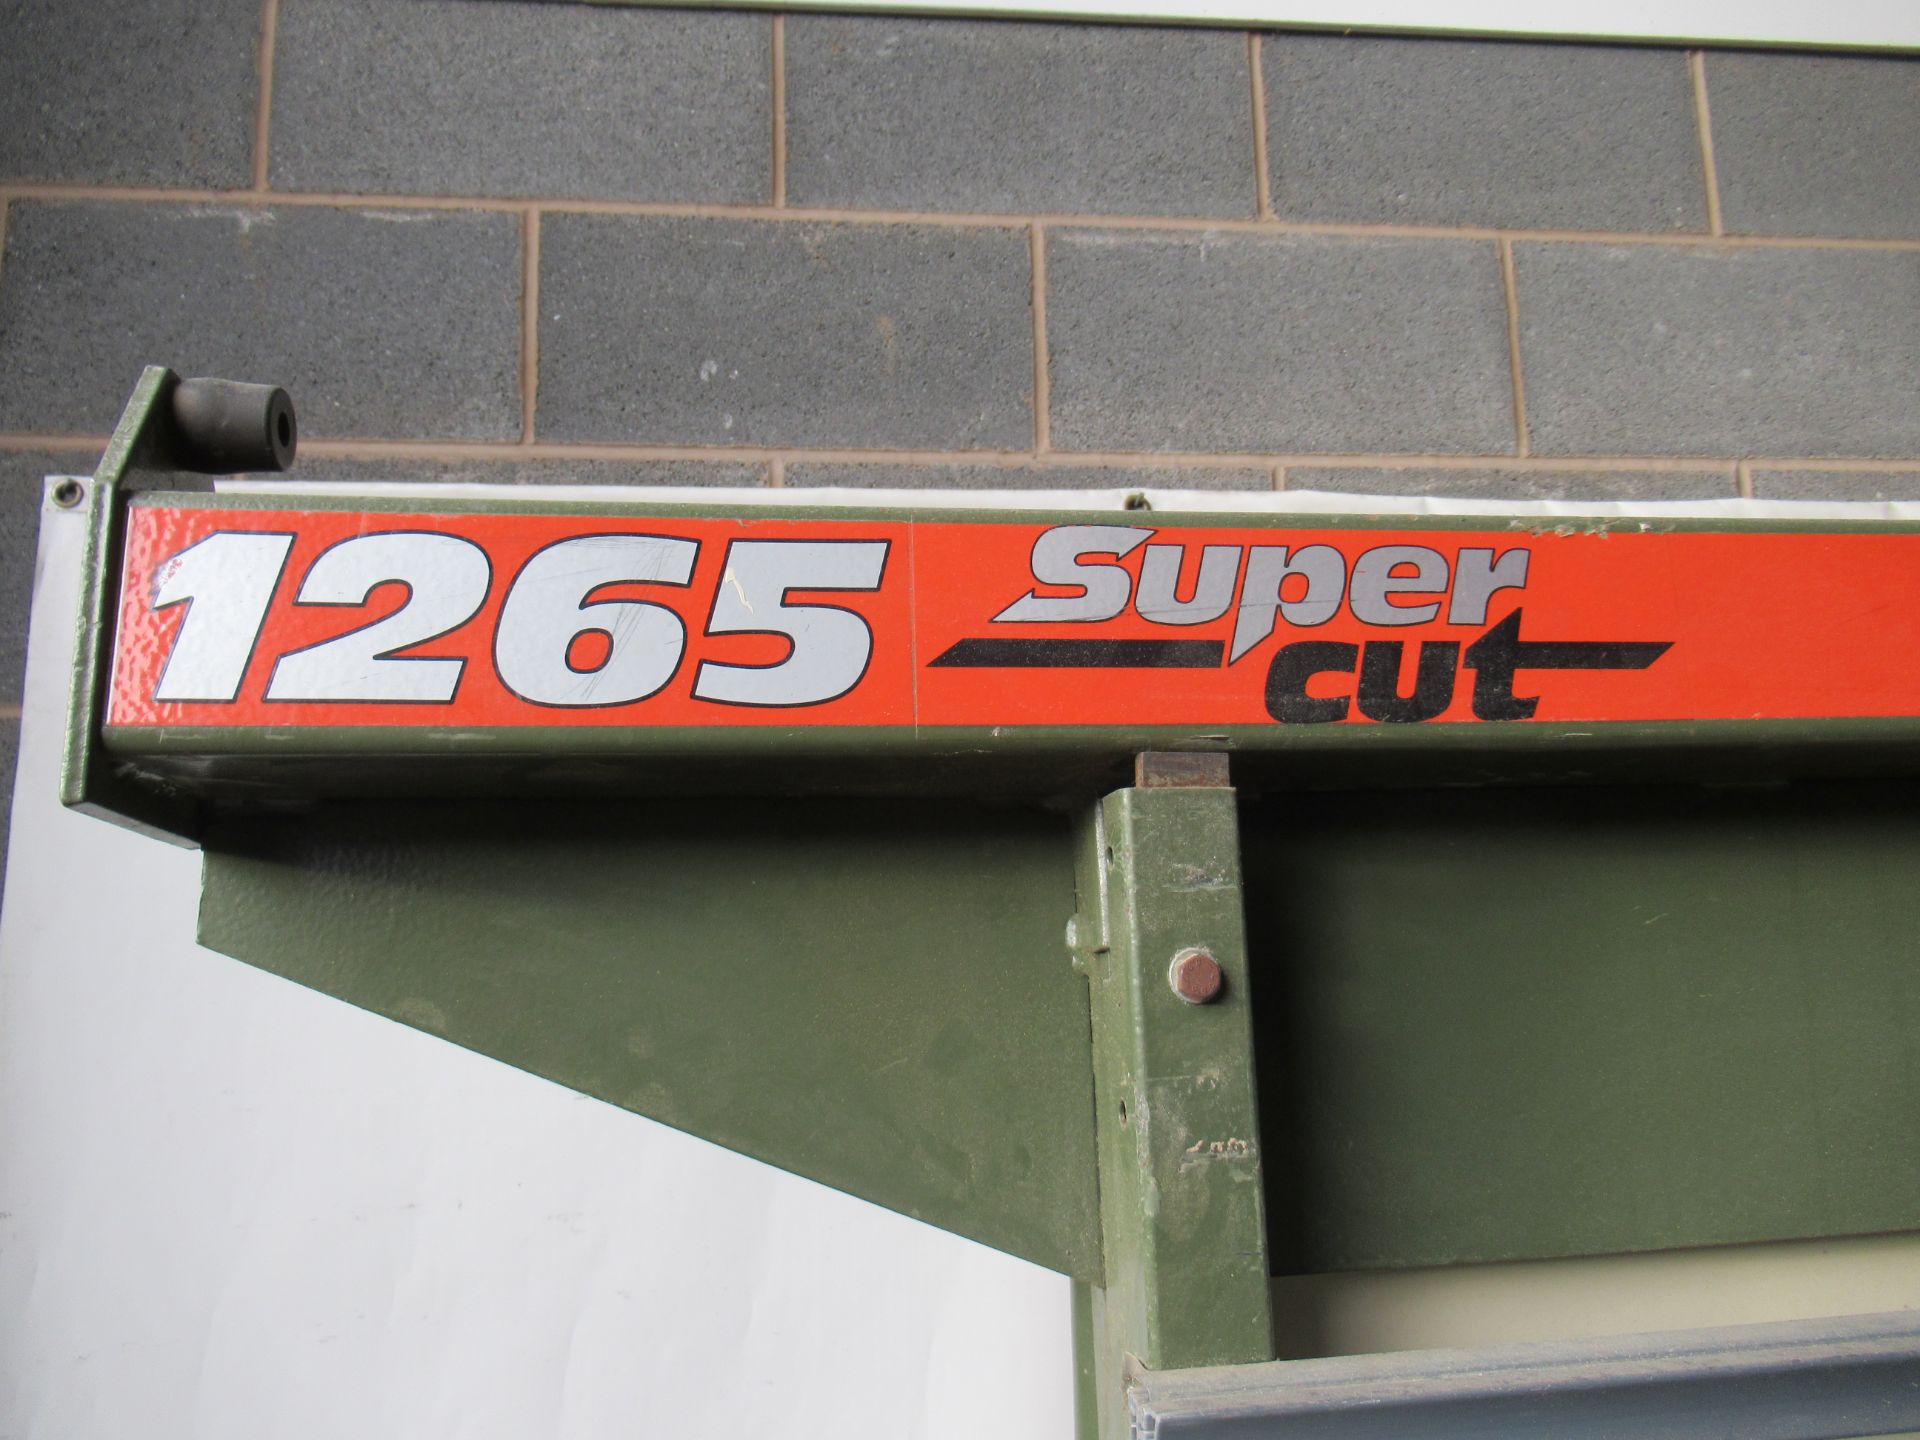 Holzher supercut 1265 wall saw - Image 5 of 14